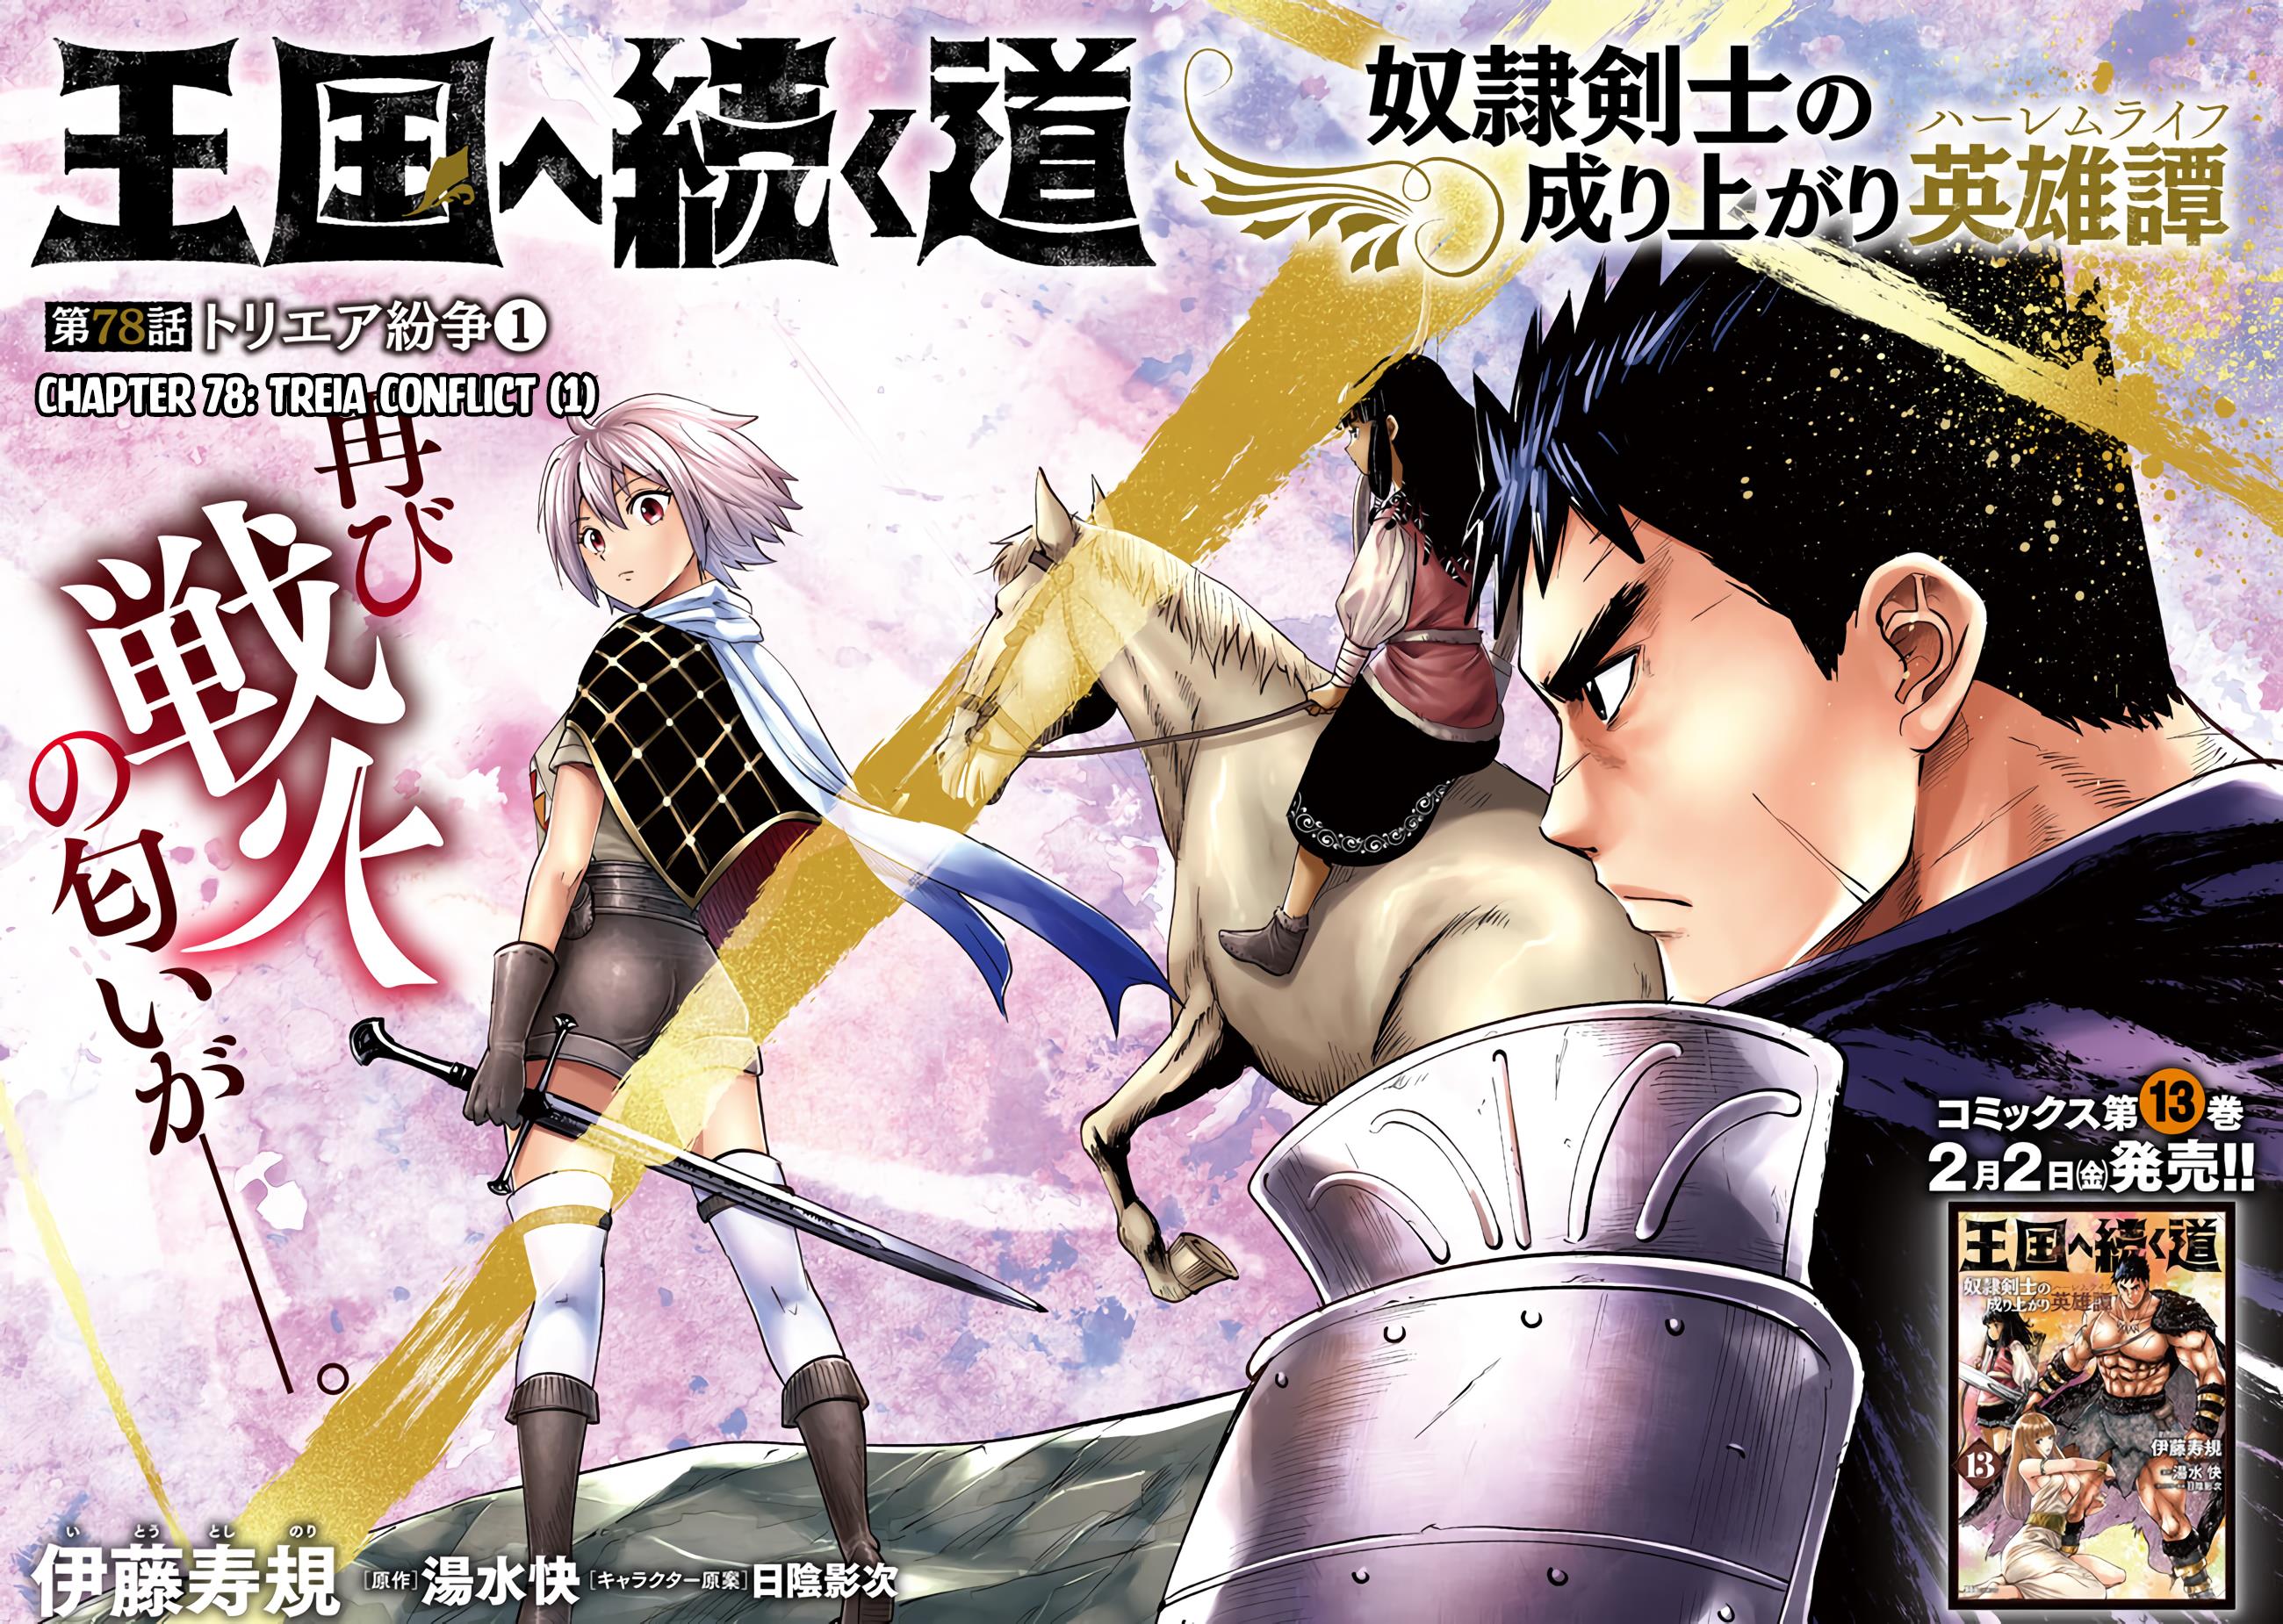 Road To Kingdom Vol.14 Chapter 78: Treia Conflict (1) - Picture 3